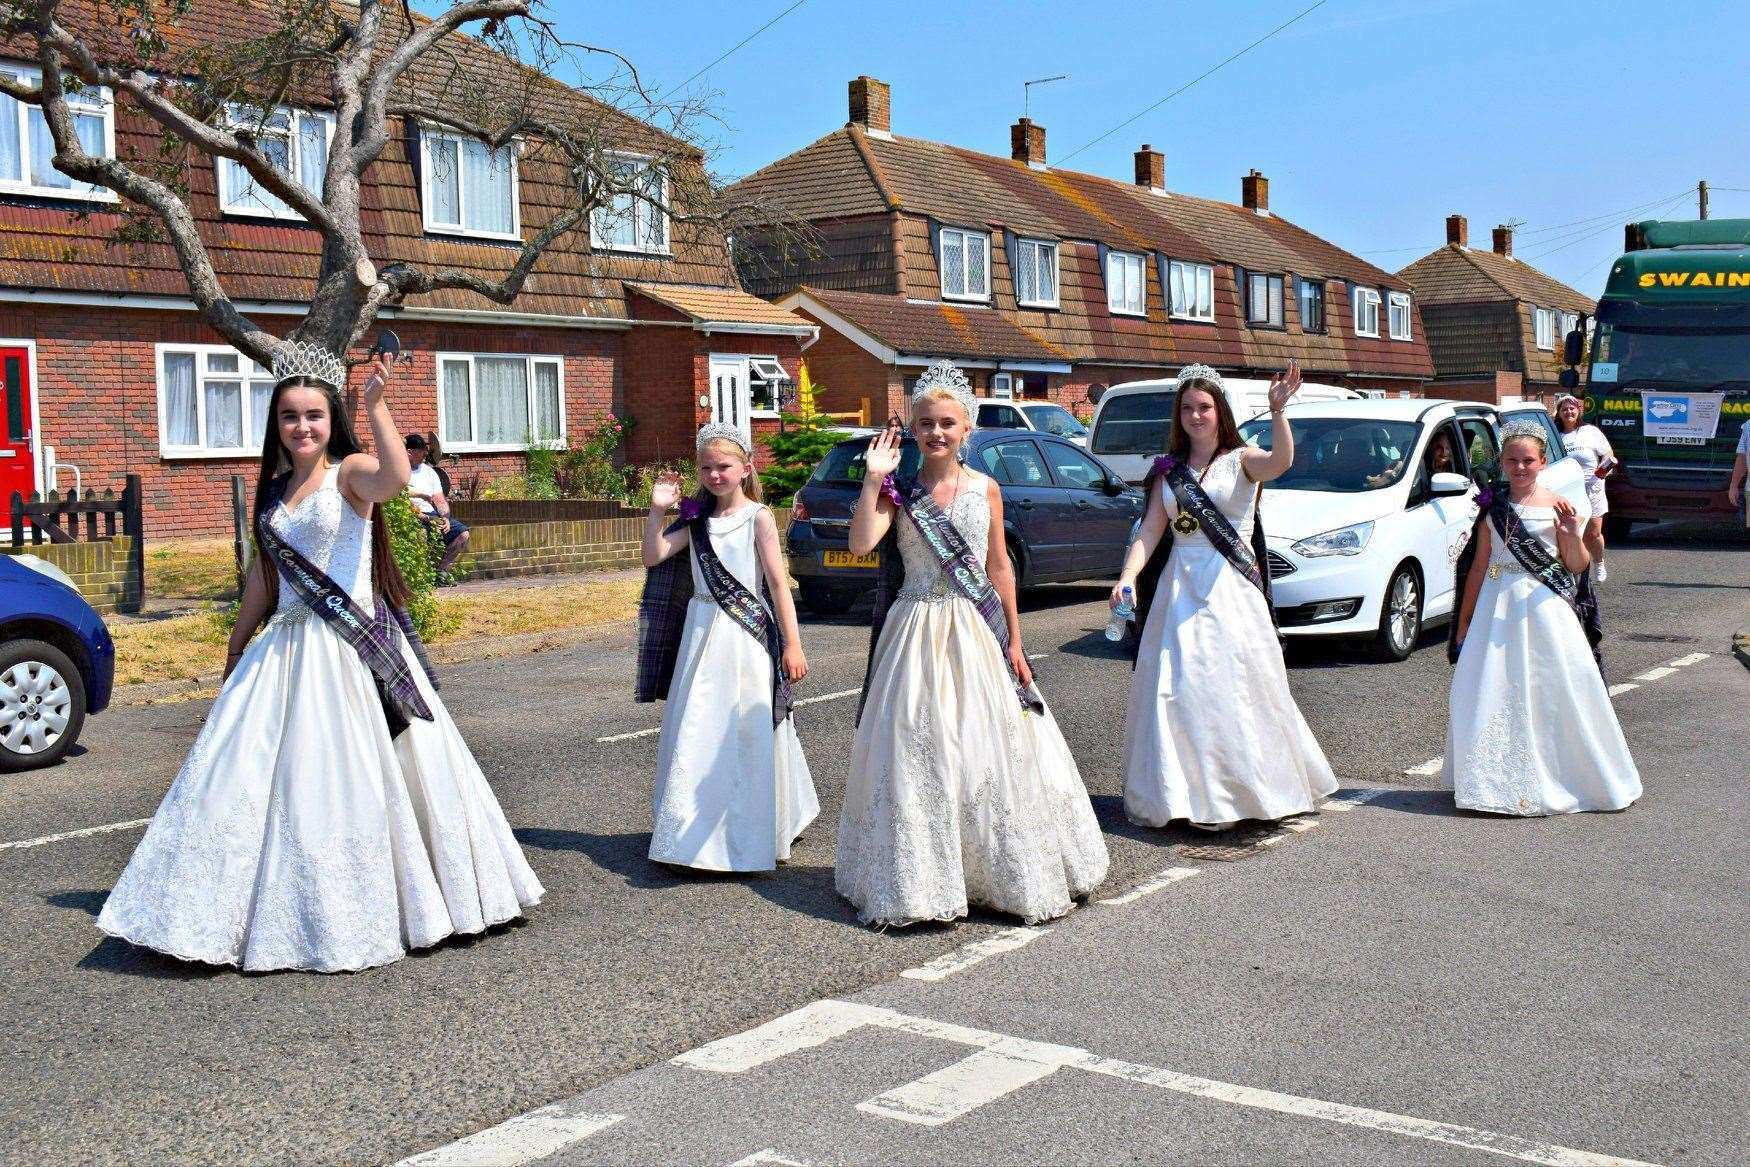 The Carnival Queen's from a past parade. Picture supplied by: Lorraine Giddy